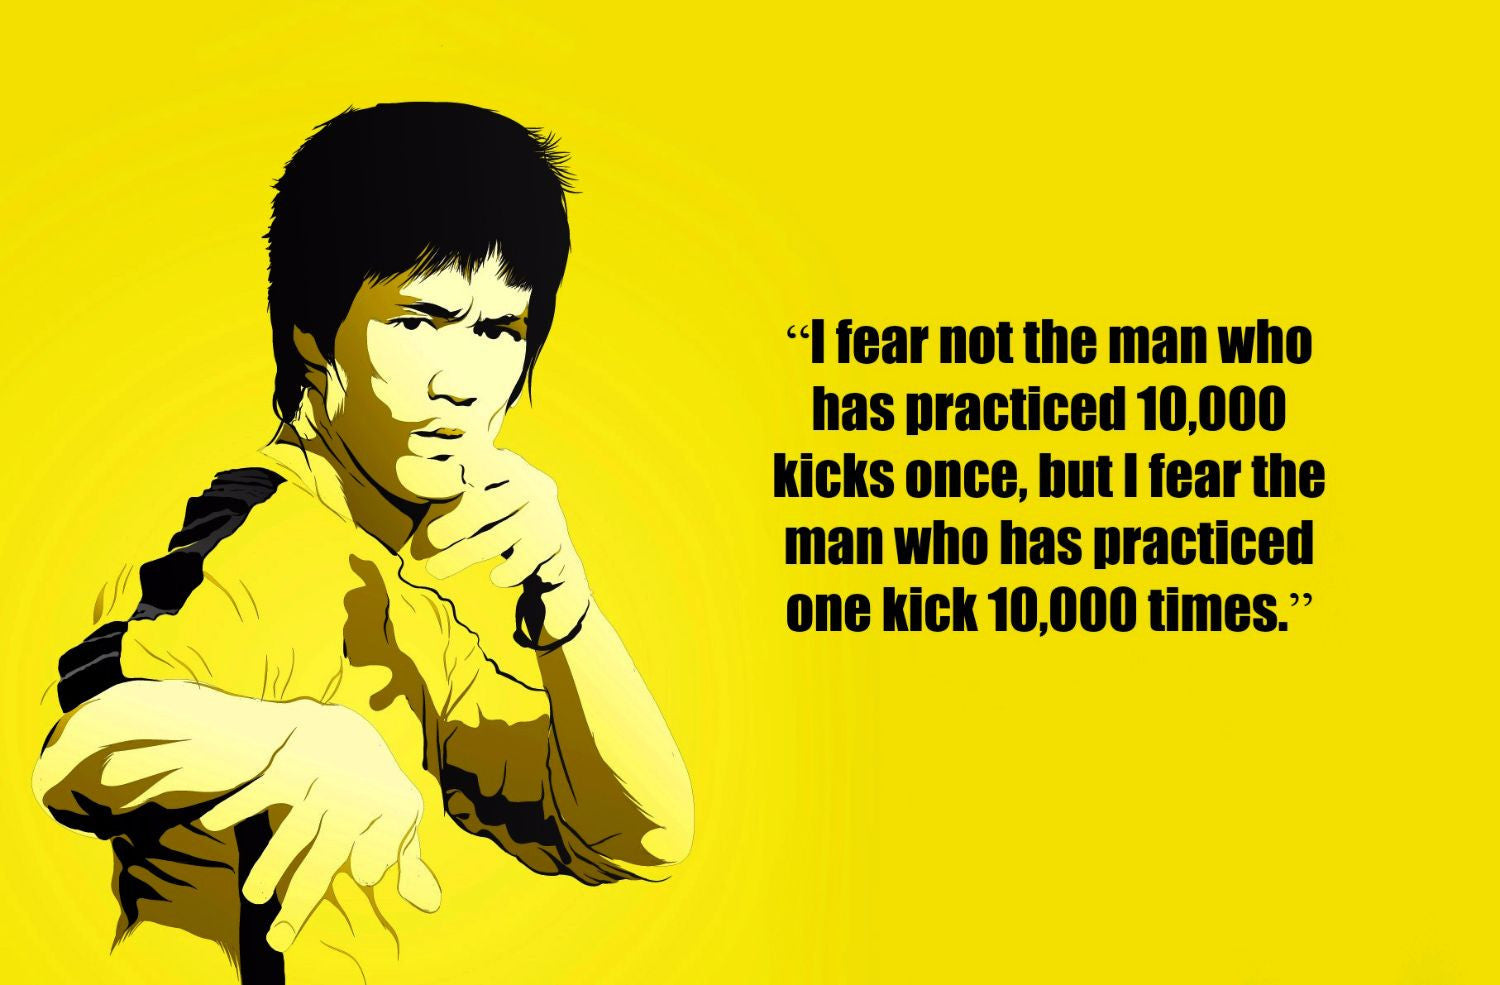 Spirit Of Sports - Motivational Quote - The Power Of Practice - Bruce Lee -  Canvas Prints by Joel Jerry | Buy Posters, Frames, Canvas & Digital Art  Prints | Small, Compact, Medium and Large Variants